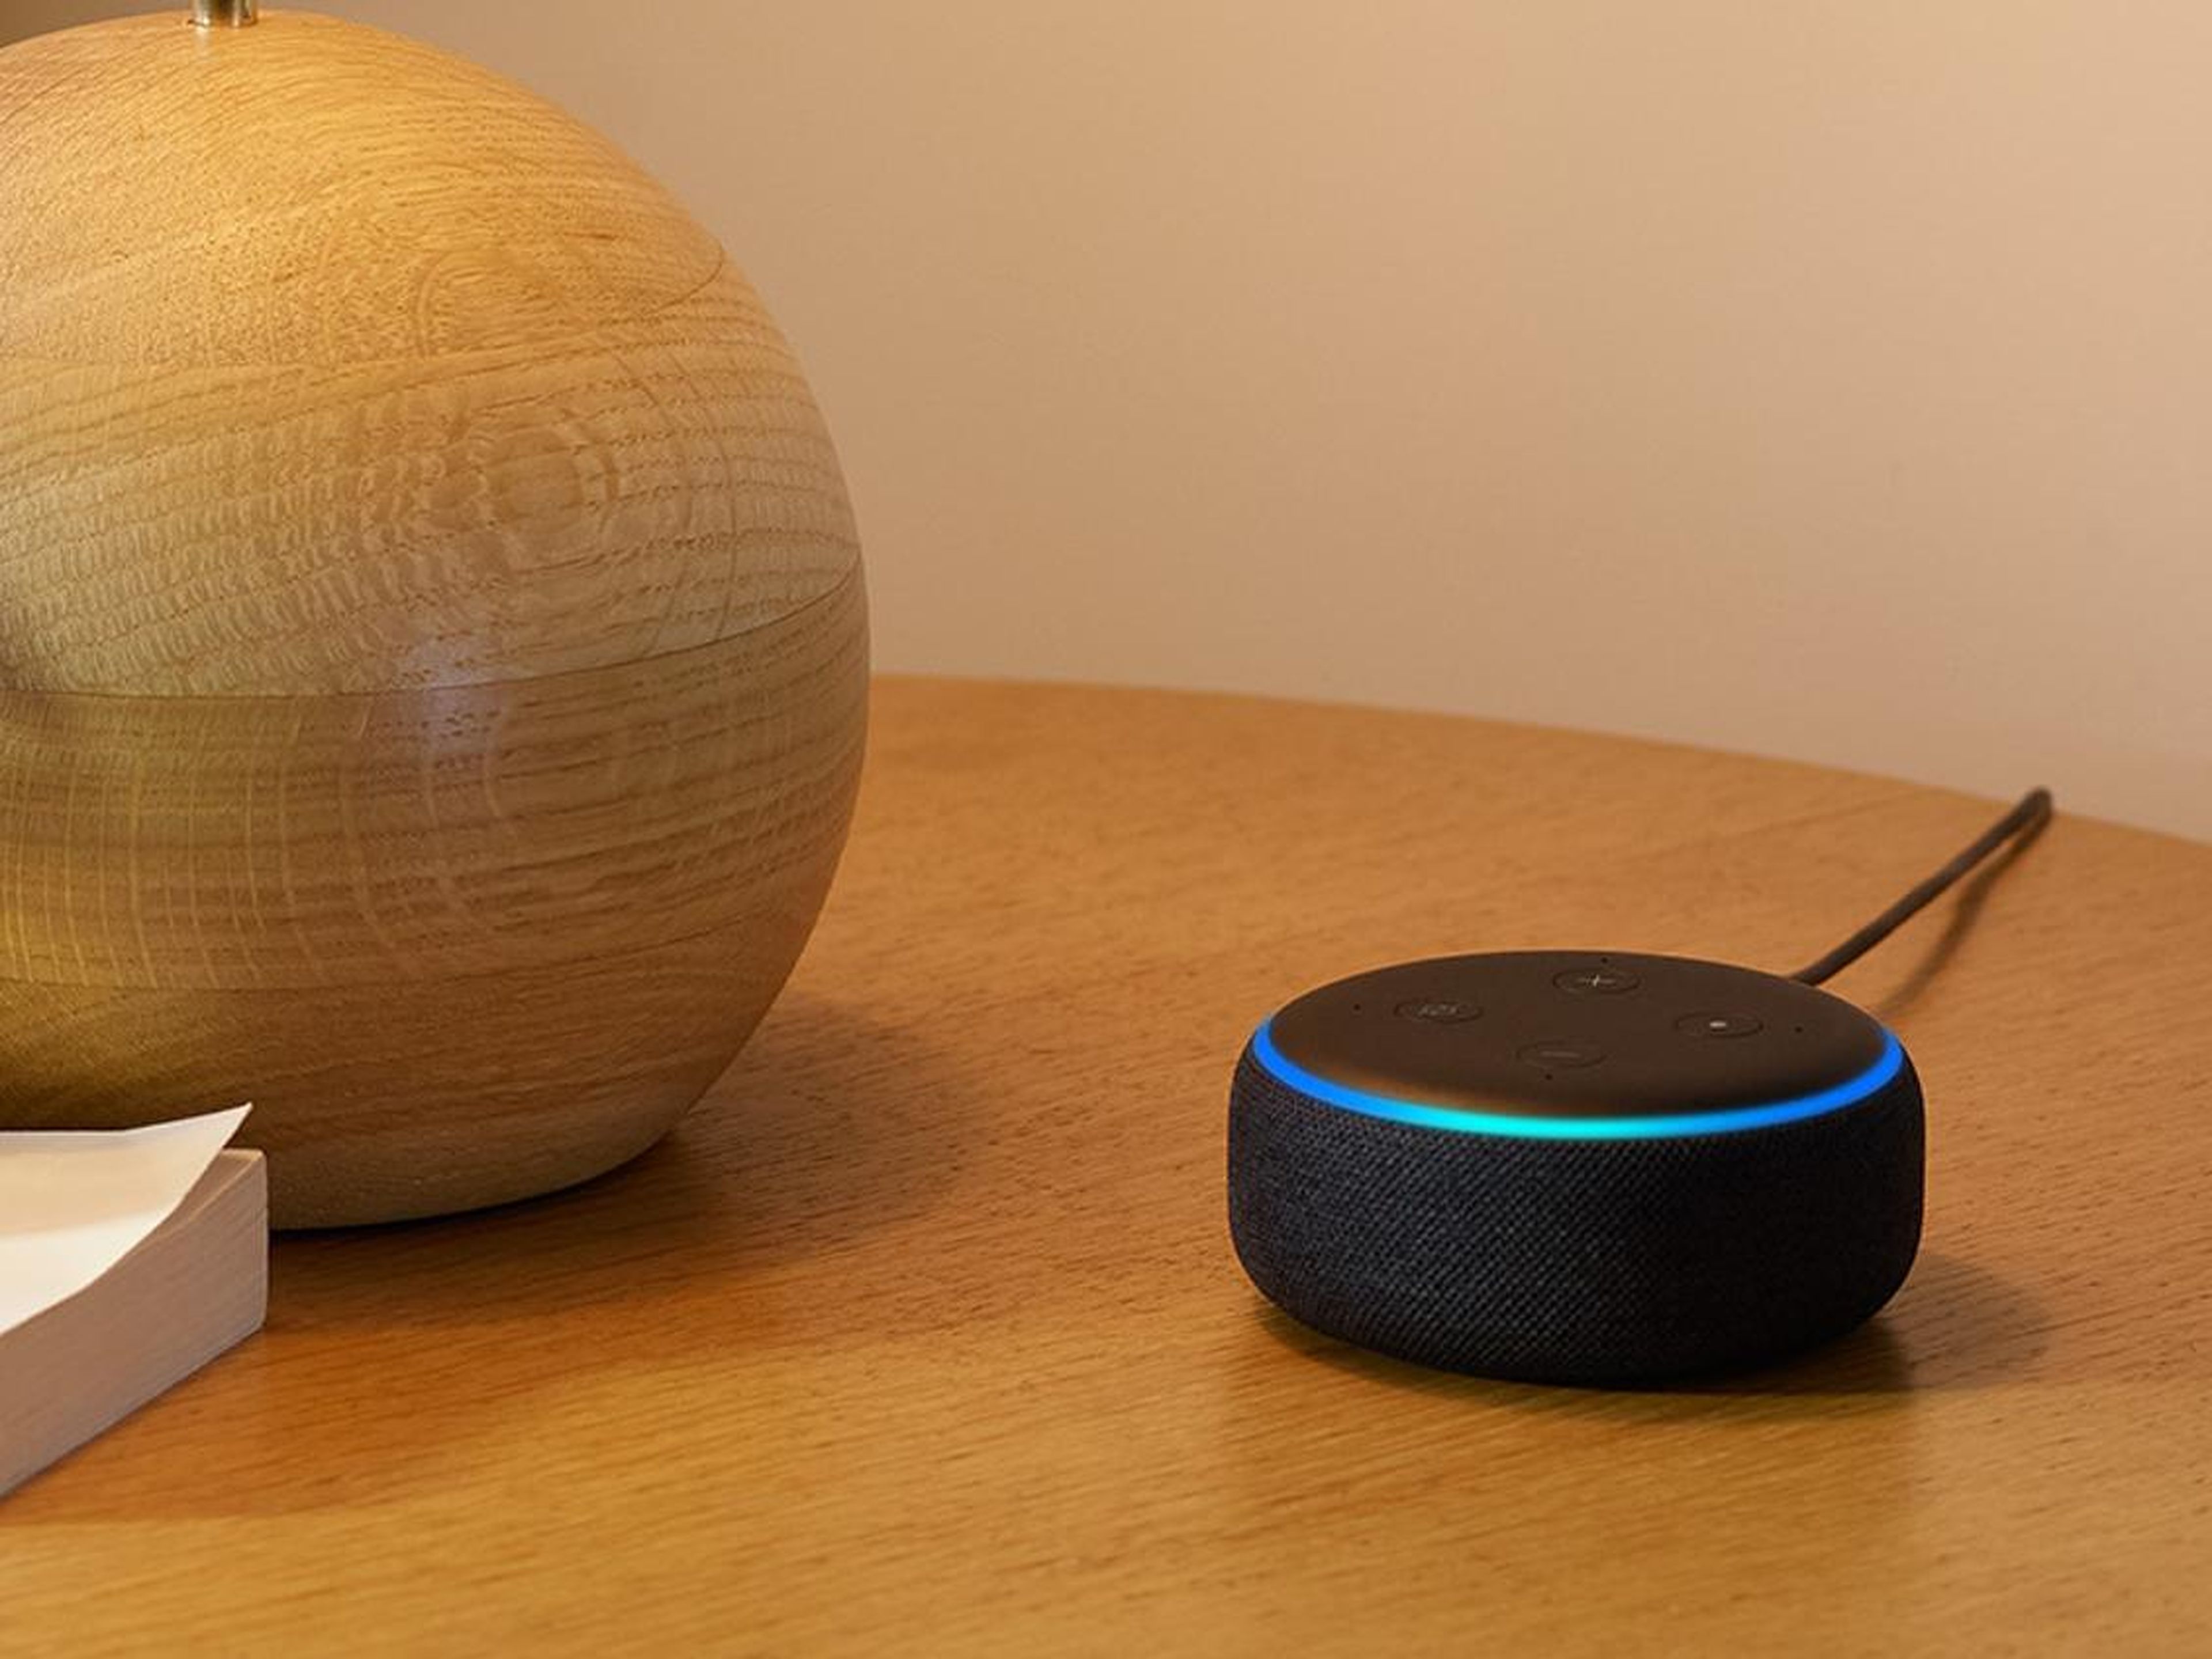 We tested the Amazon Echo Dot and Google Home Mini to see which one is the best small smart speaker